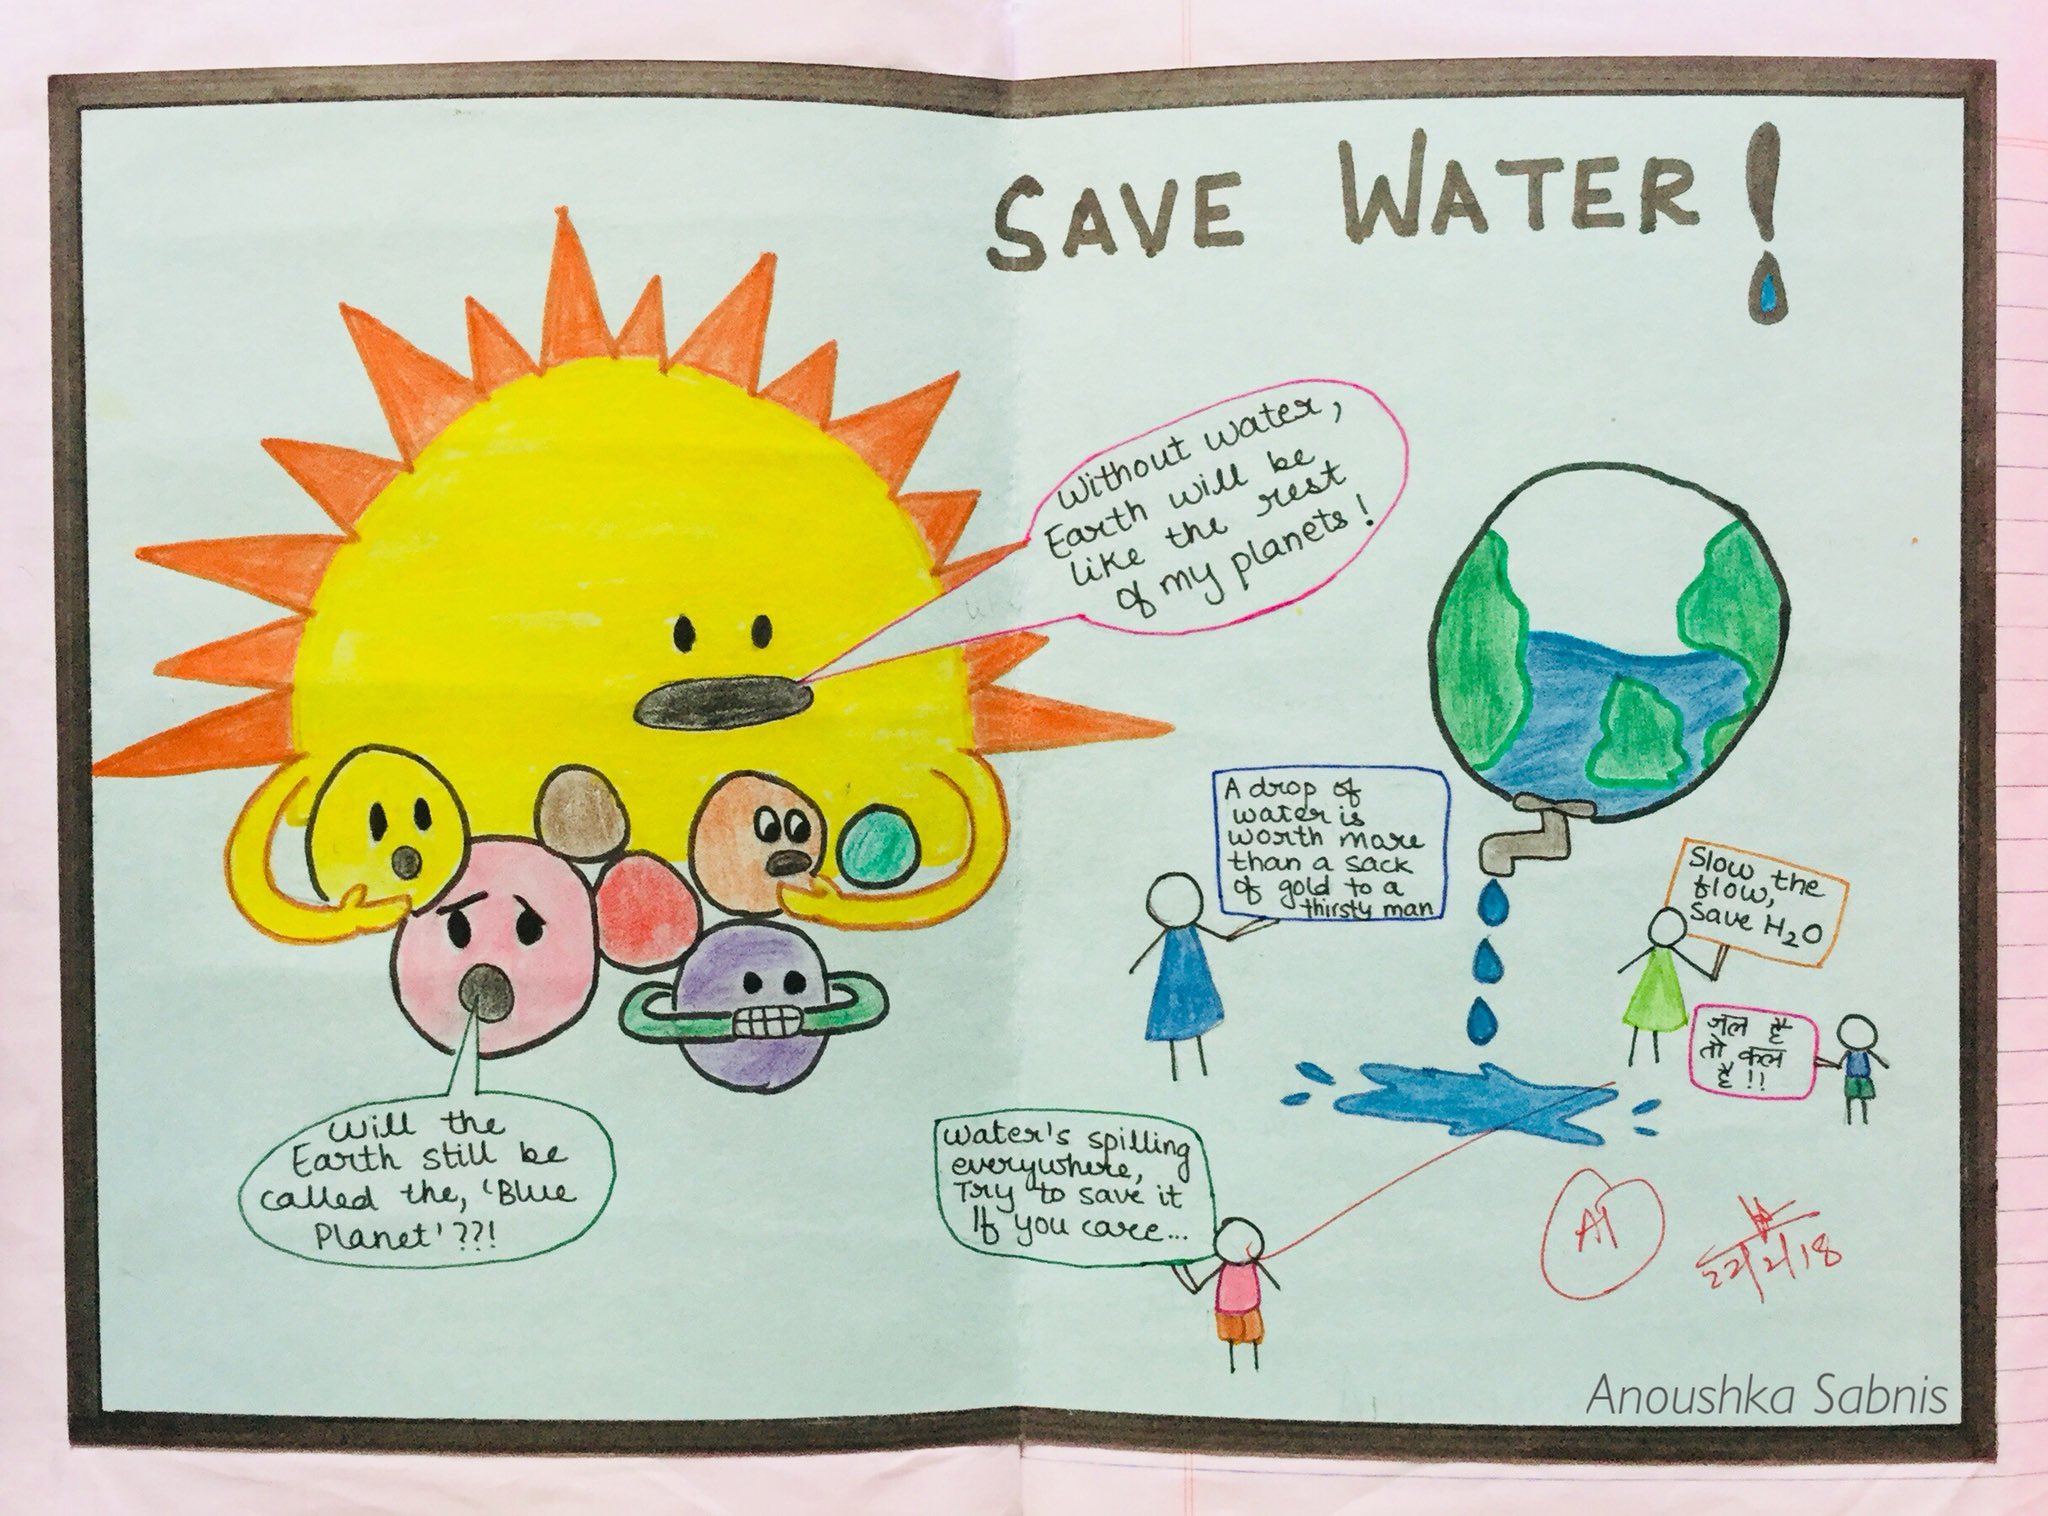 How to save. Save our Planet плакат. Проект save the Planet. Плакат на тему save Water. Проект save our Planet.